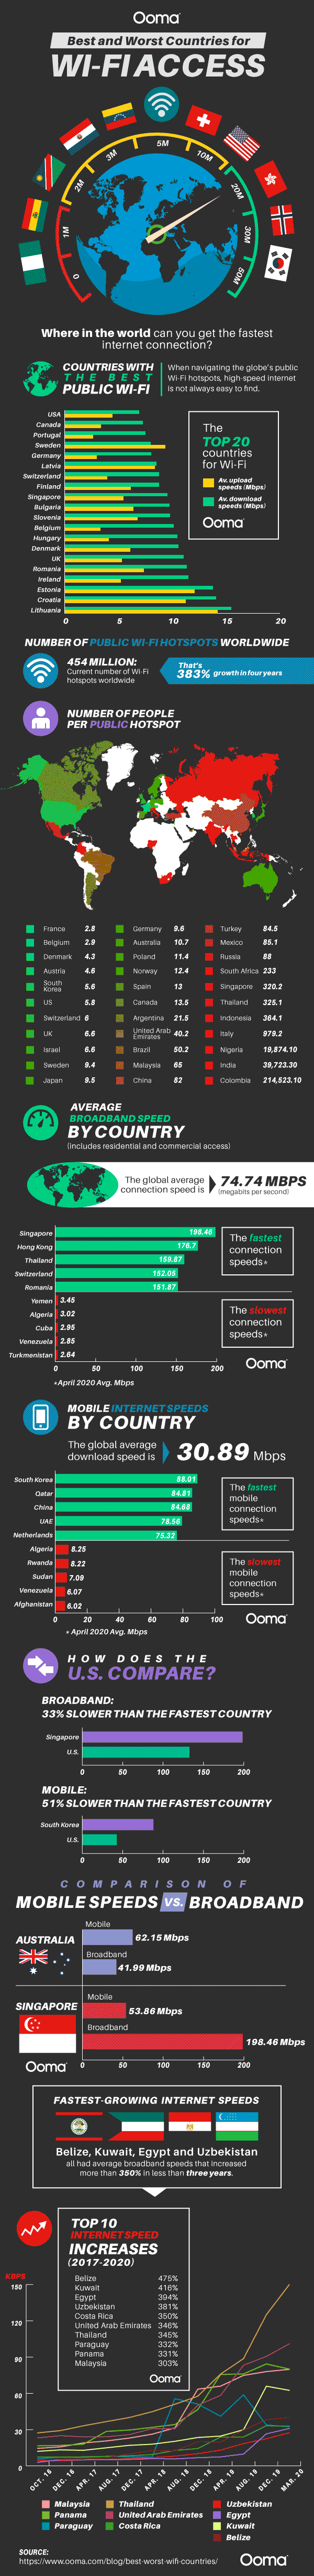 Best and Worst Countries for Wi-Fi Access